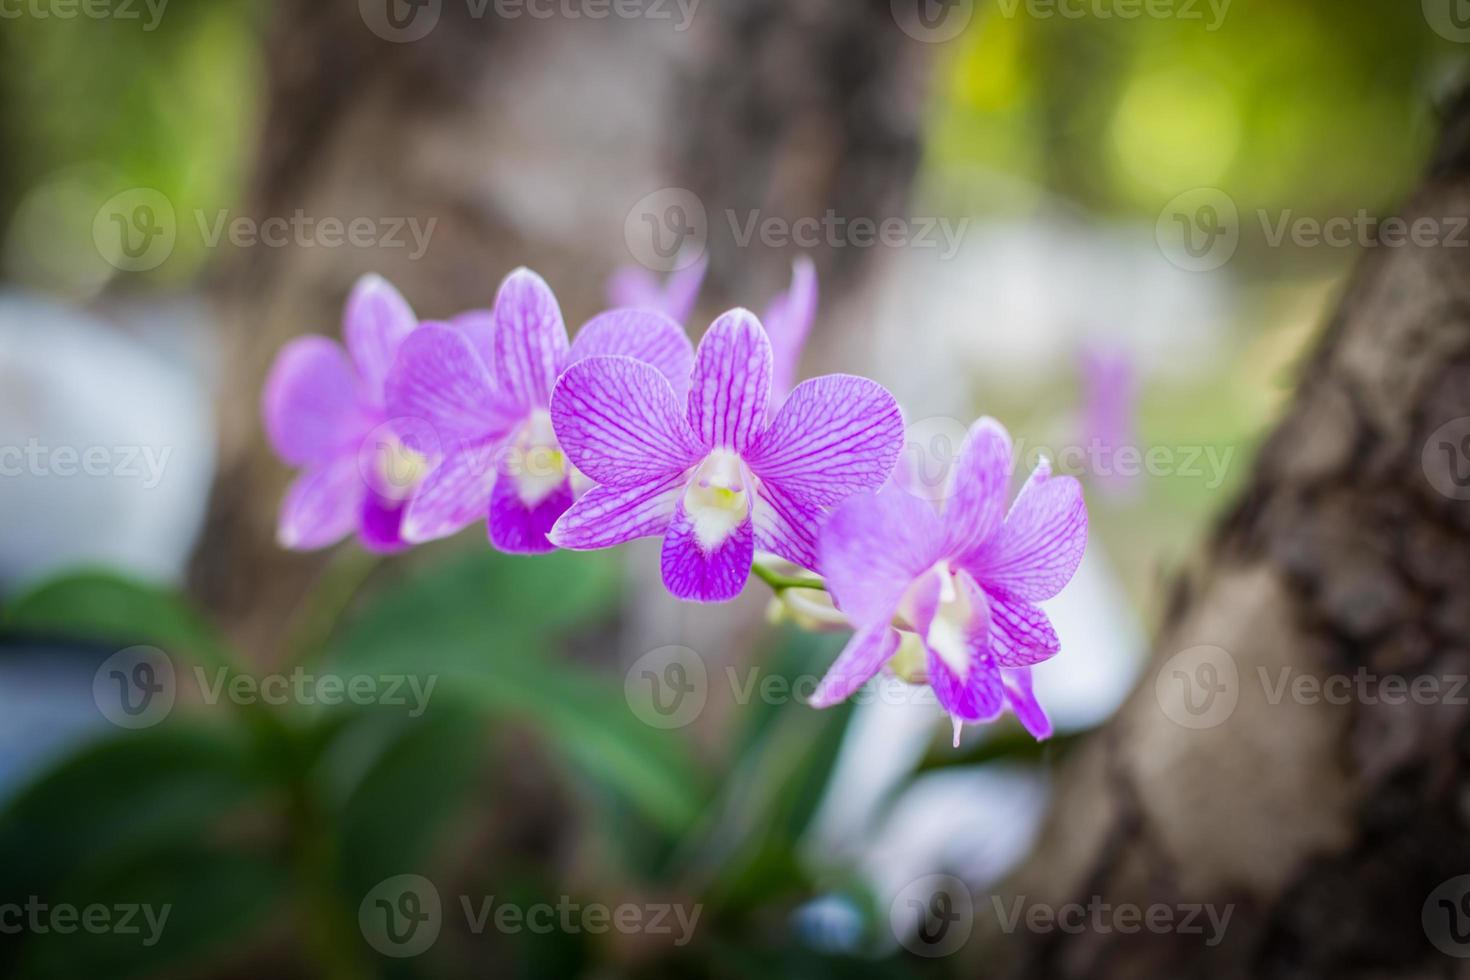 orchids,orchids purple ,orchids purple Is considered the queen of flowers in Thailand photo